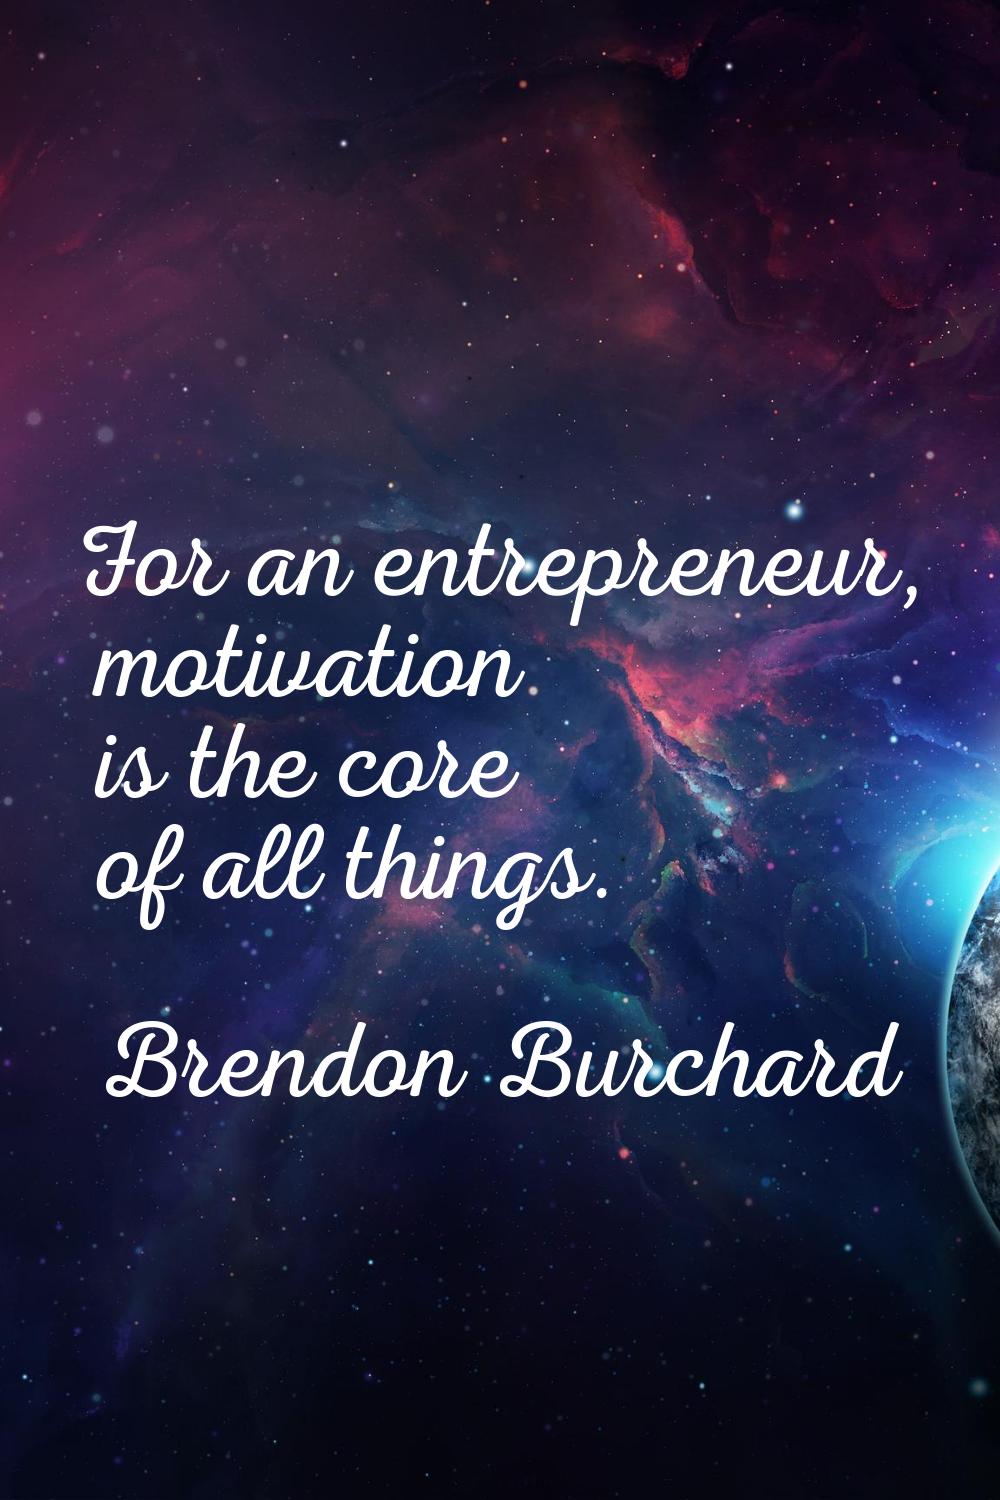 For an entrepreneur, motivation is the core of all things.